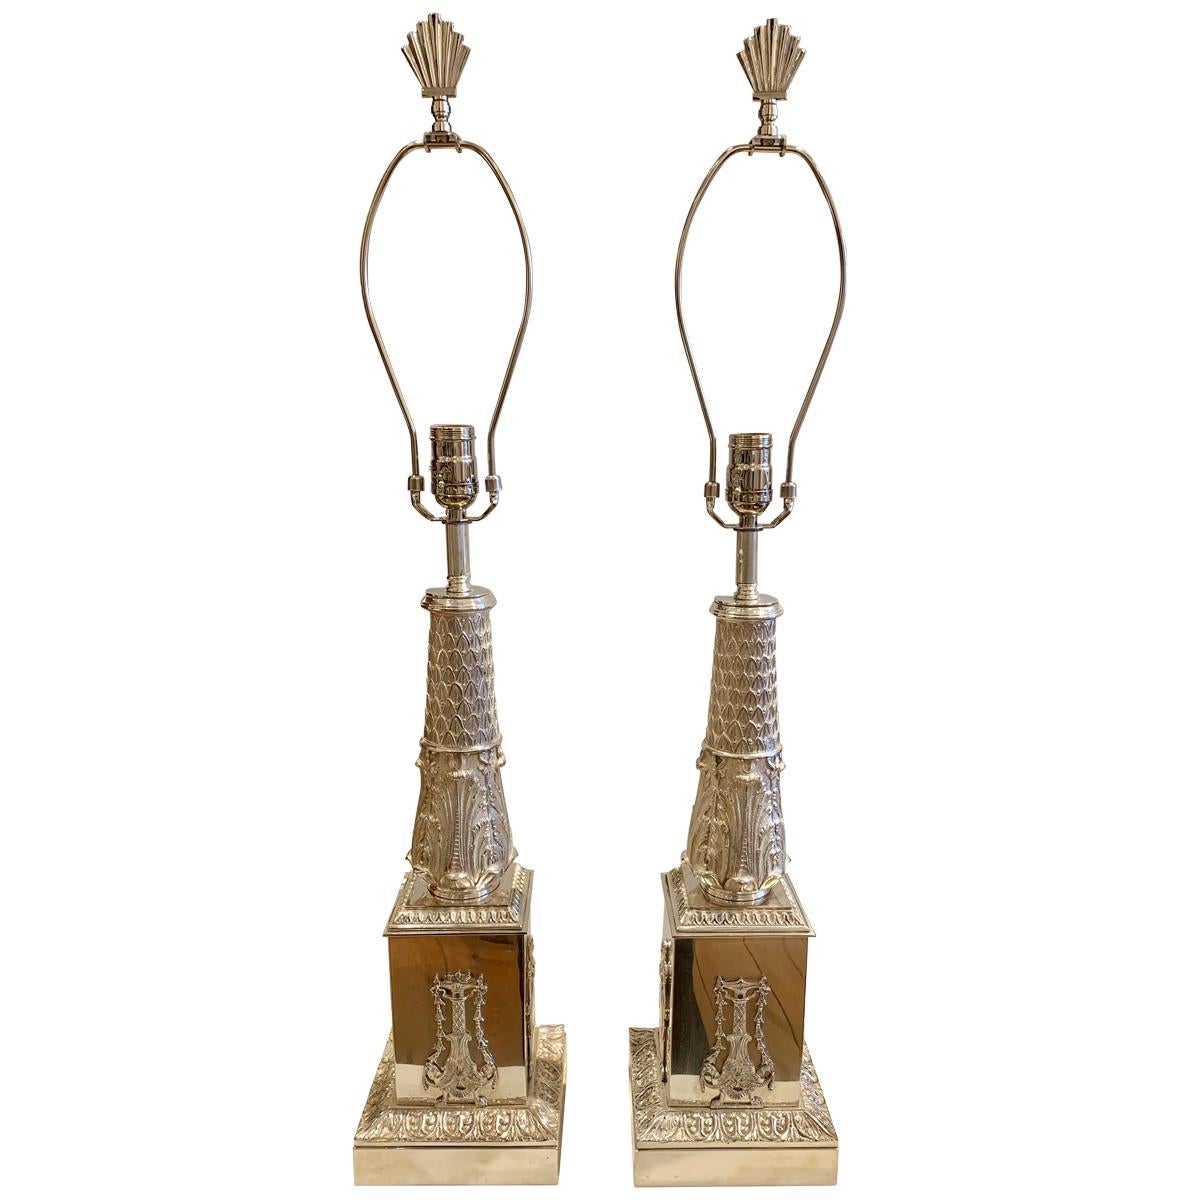 Pair of 19th Century Regency Silvered Neoclassical Lamps